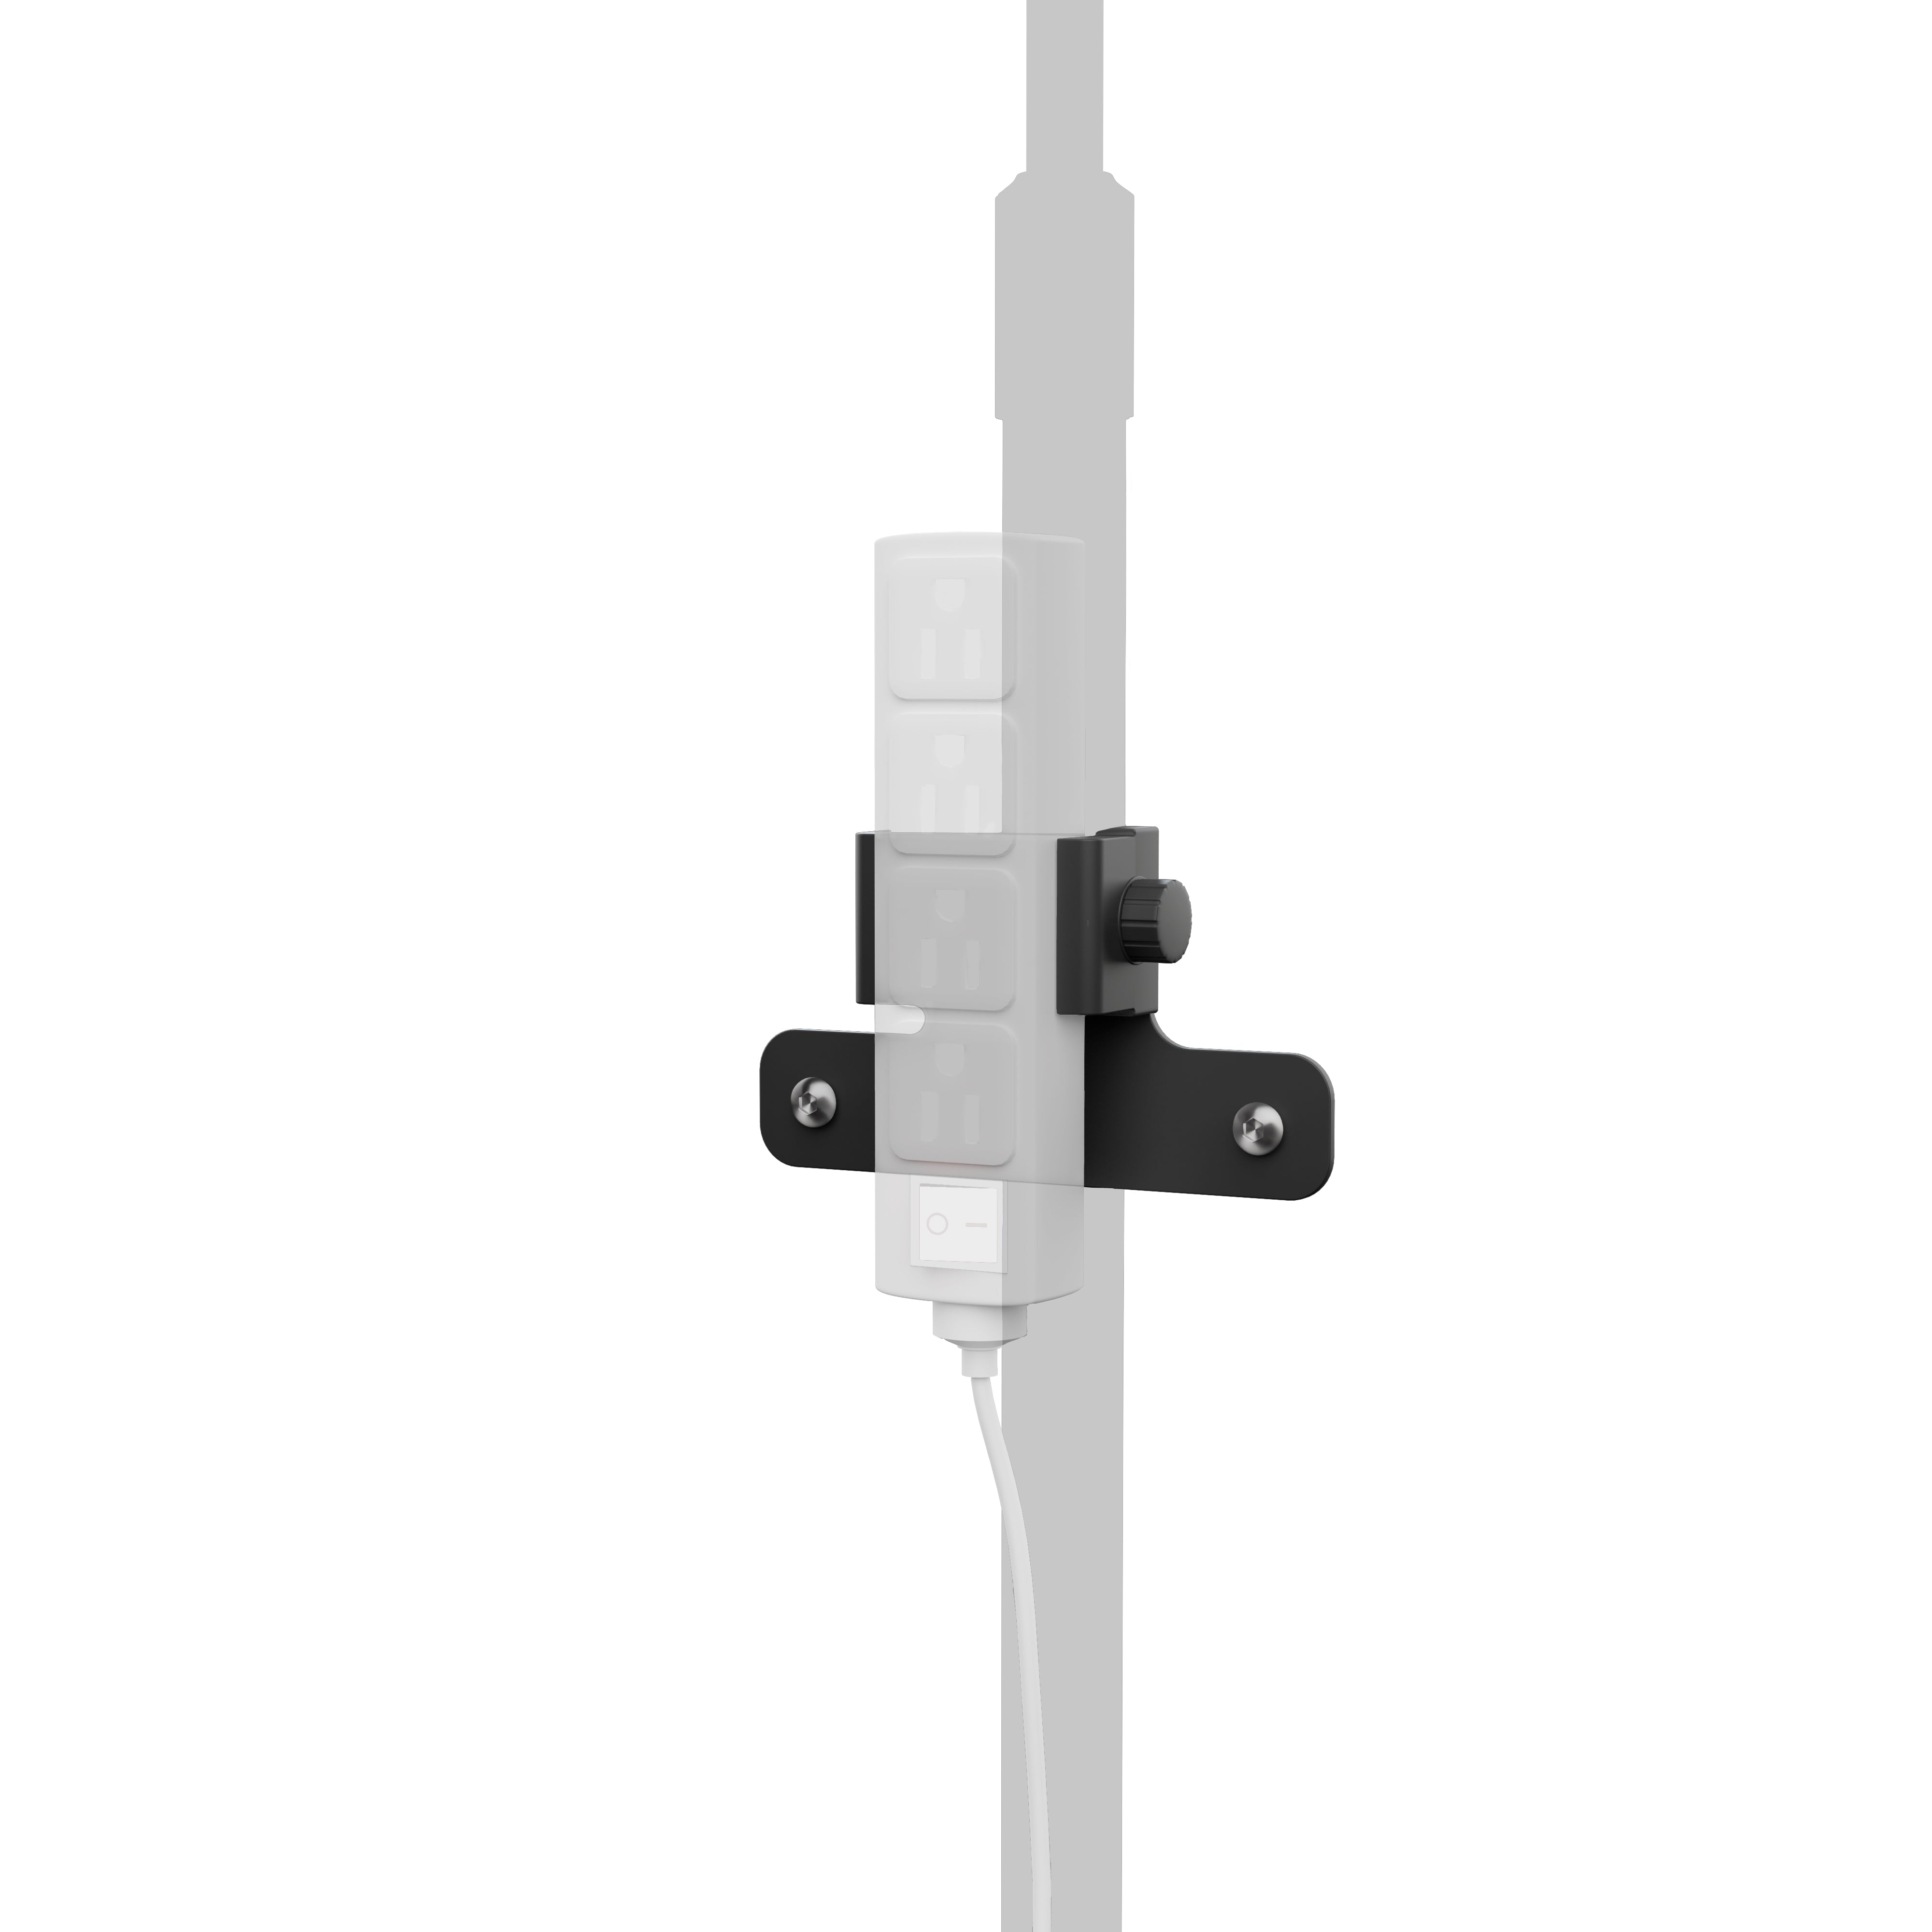 Add-on Clamp for Power Strip